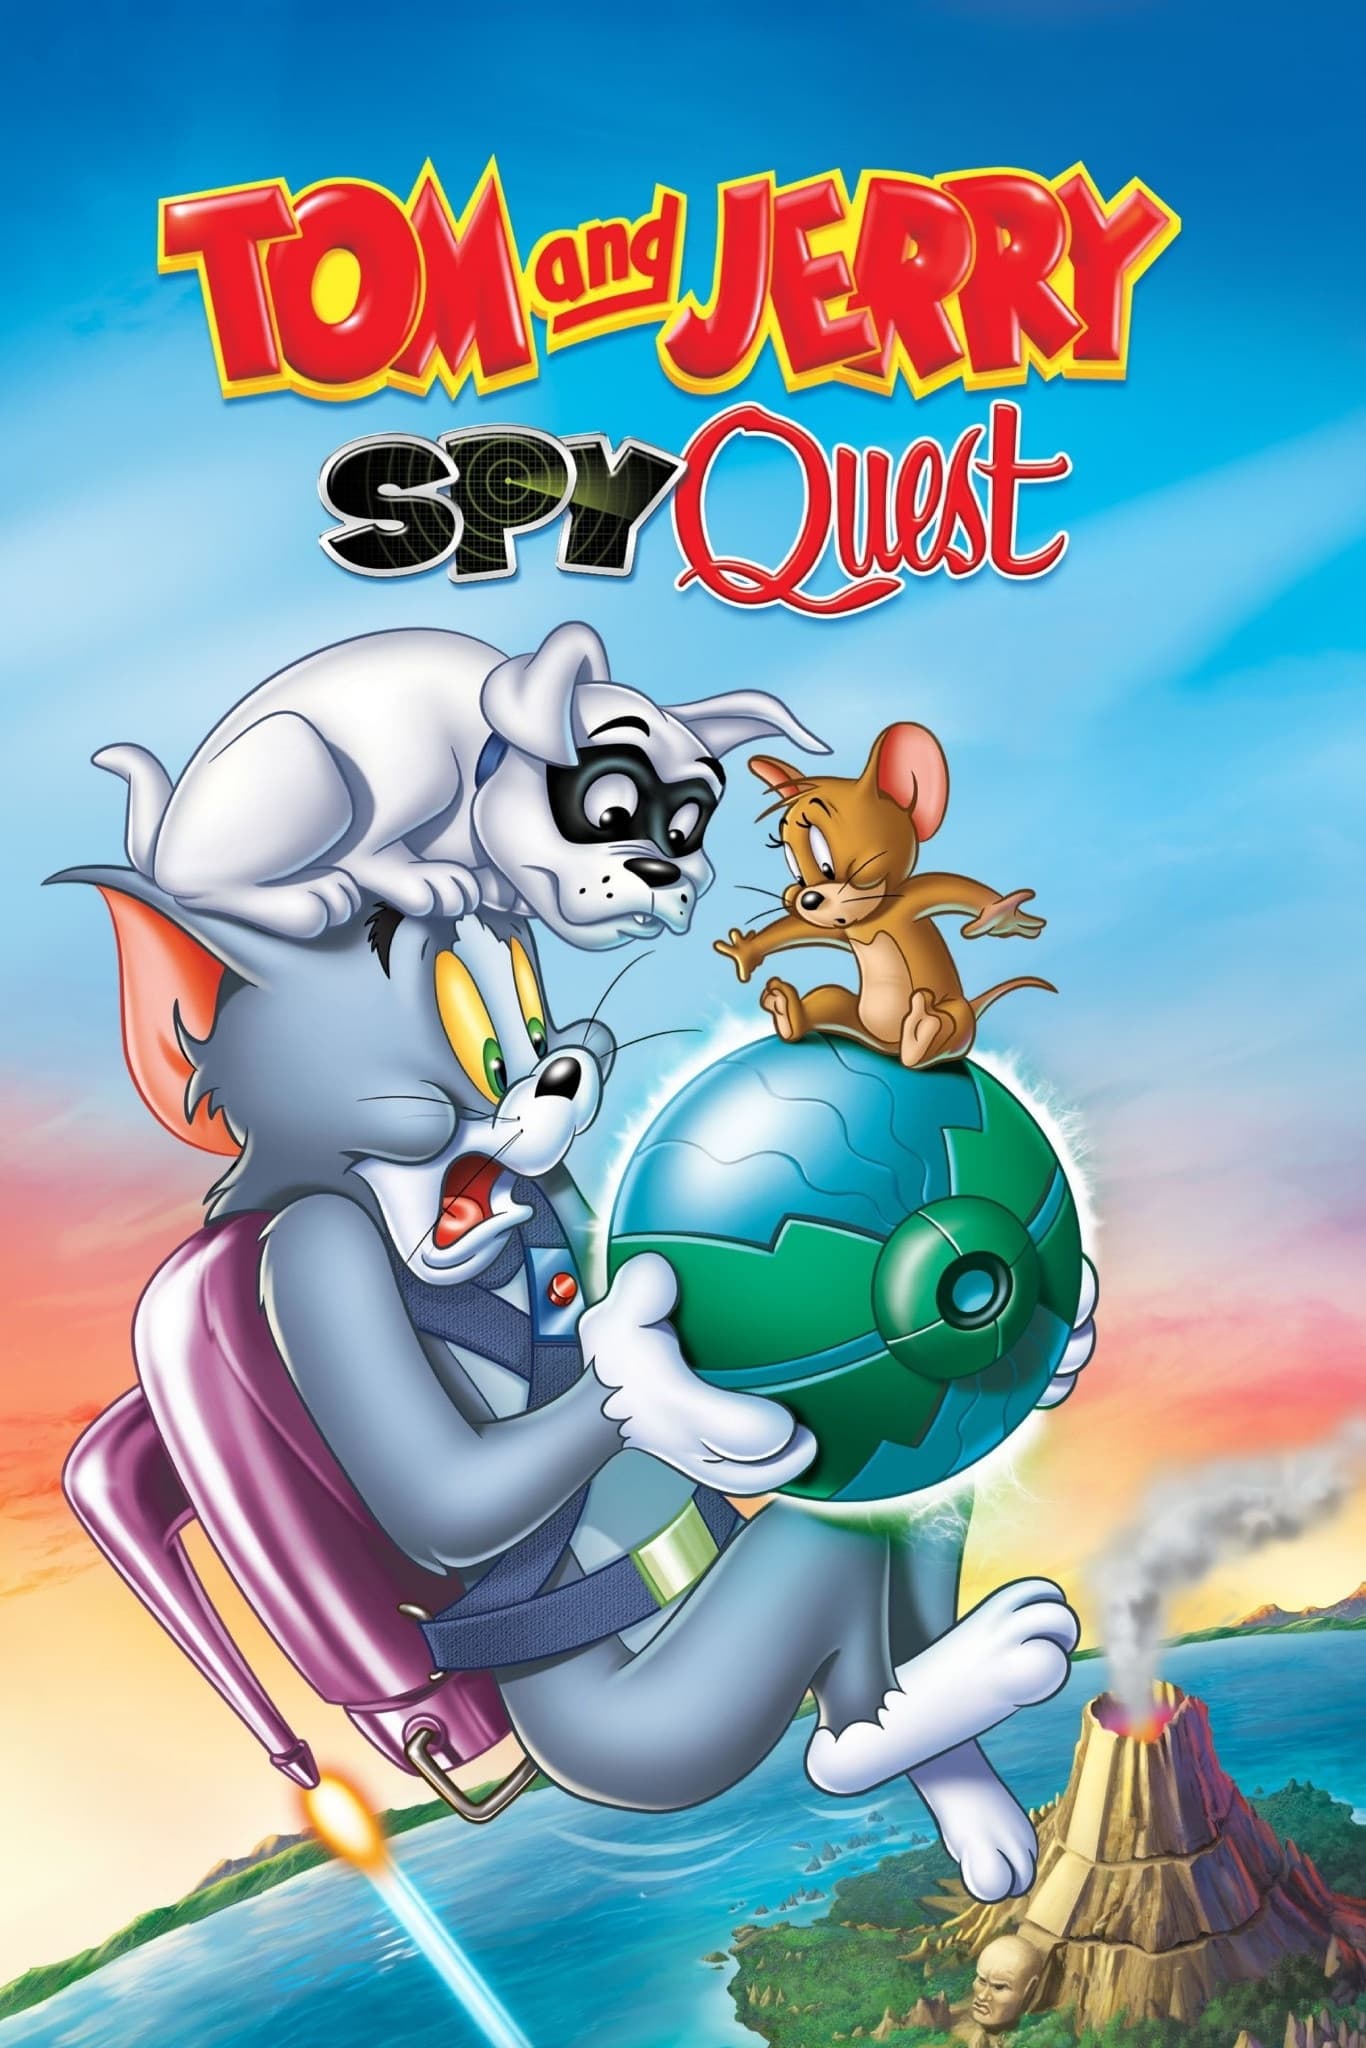 Banner Phim Tom và Jerry: Spy Quest (Tom and Jerry: Spy Quest)